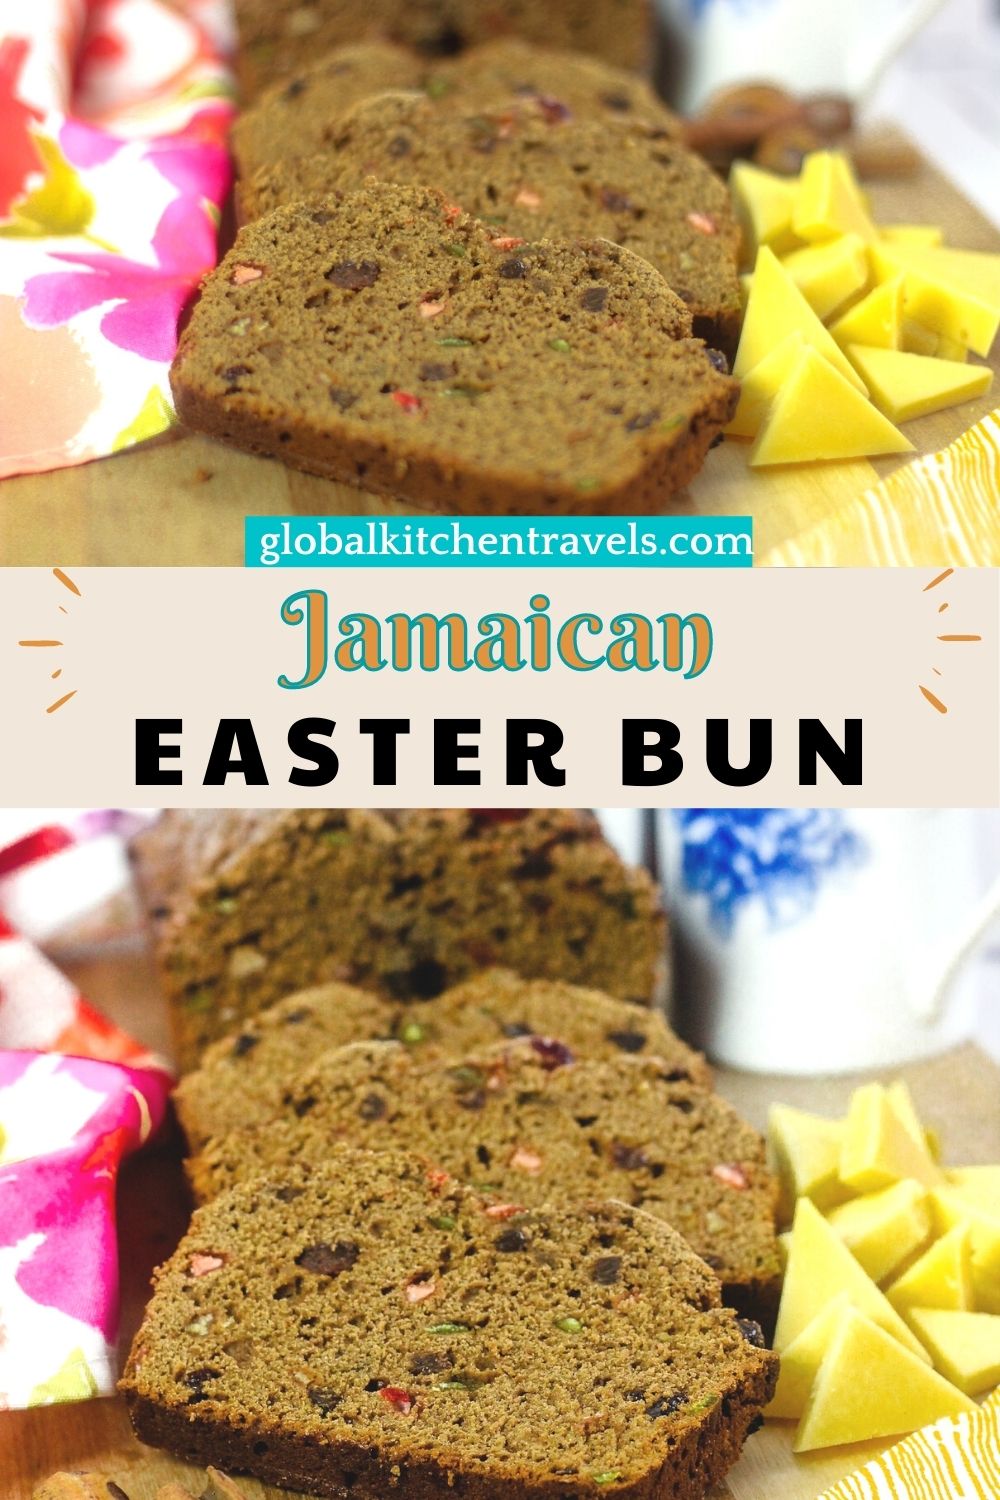 Best Jamaican Easter Bun For Spice Bun And Cheese - Global Kitchen Travels